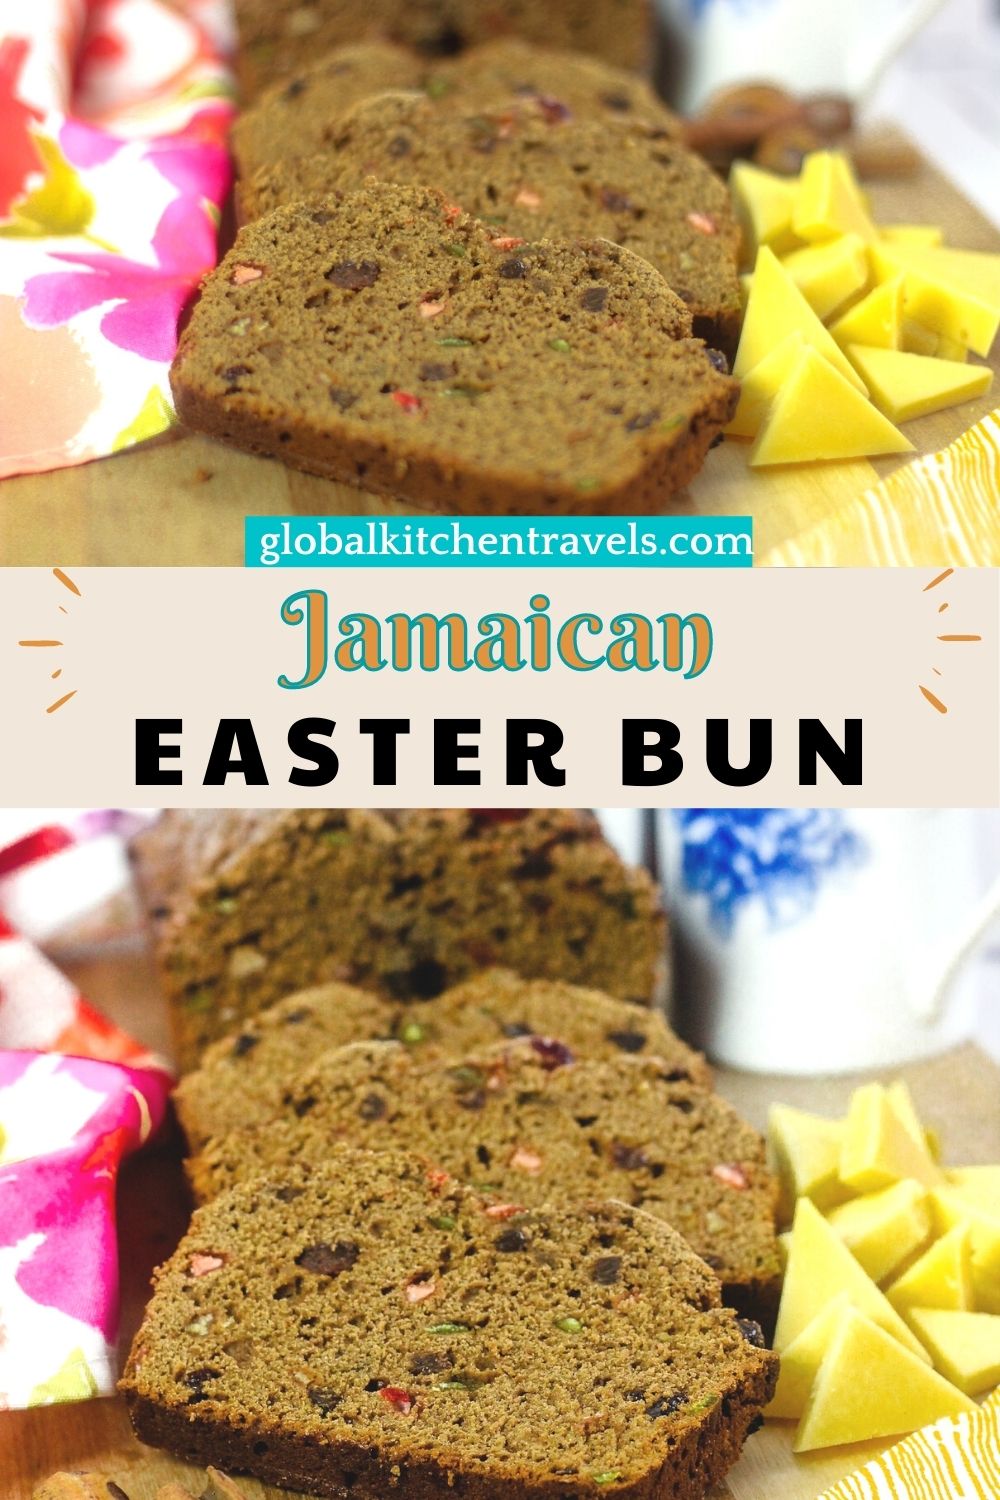 Best Jamaican Easter Bun For Spice Bun And Cheese - Global Kitchen Travels